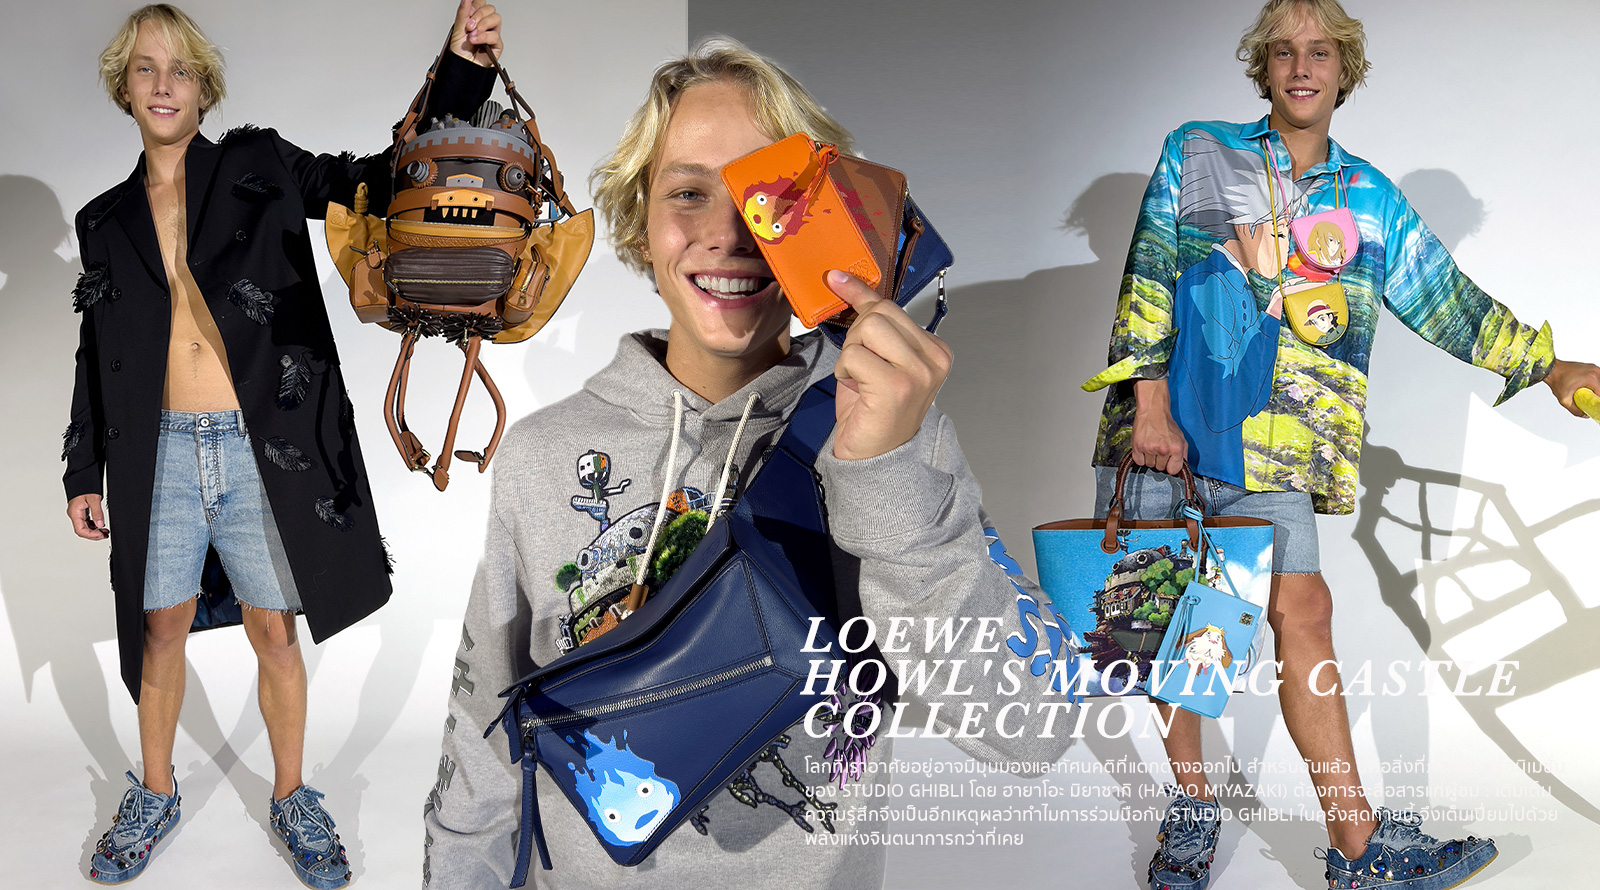 LOEWE x Howl’s Moving Castle Collection